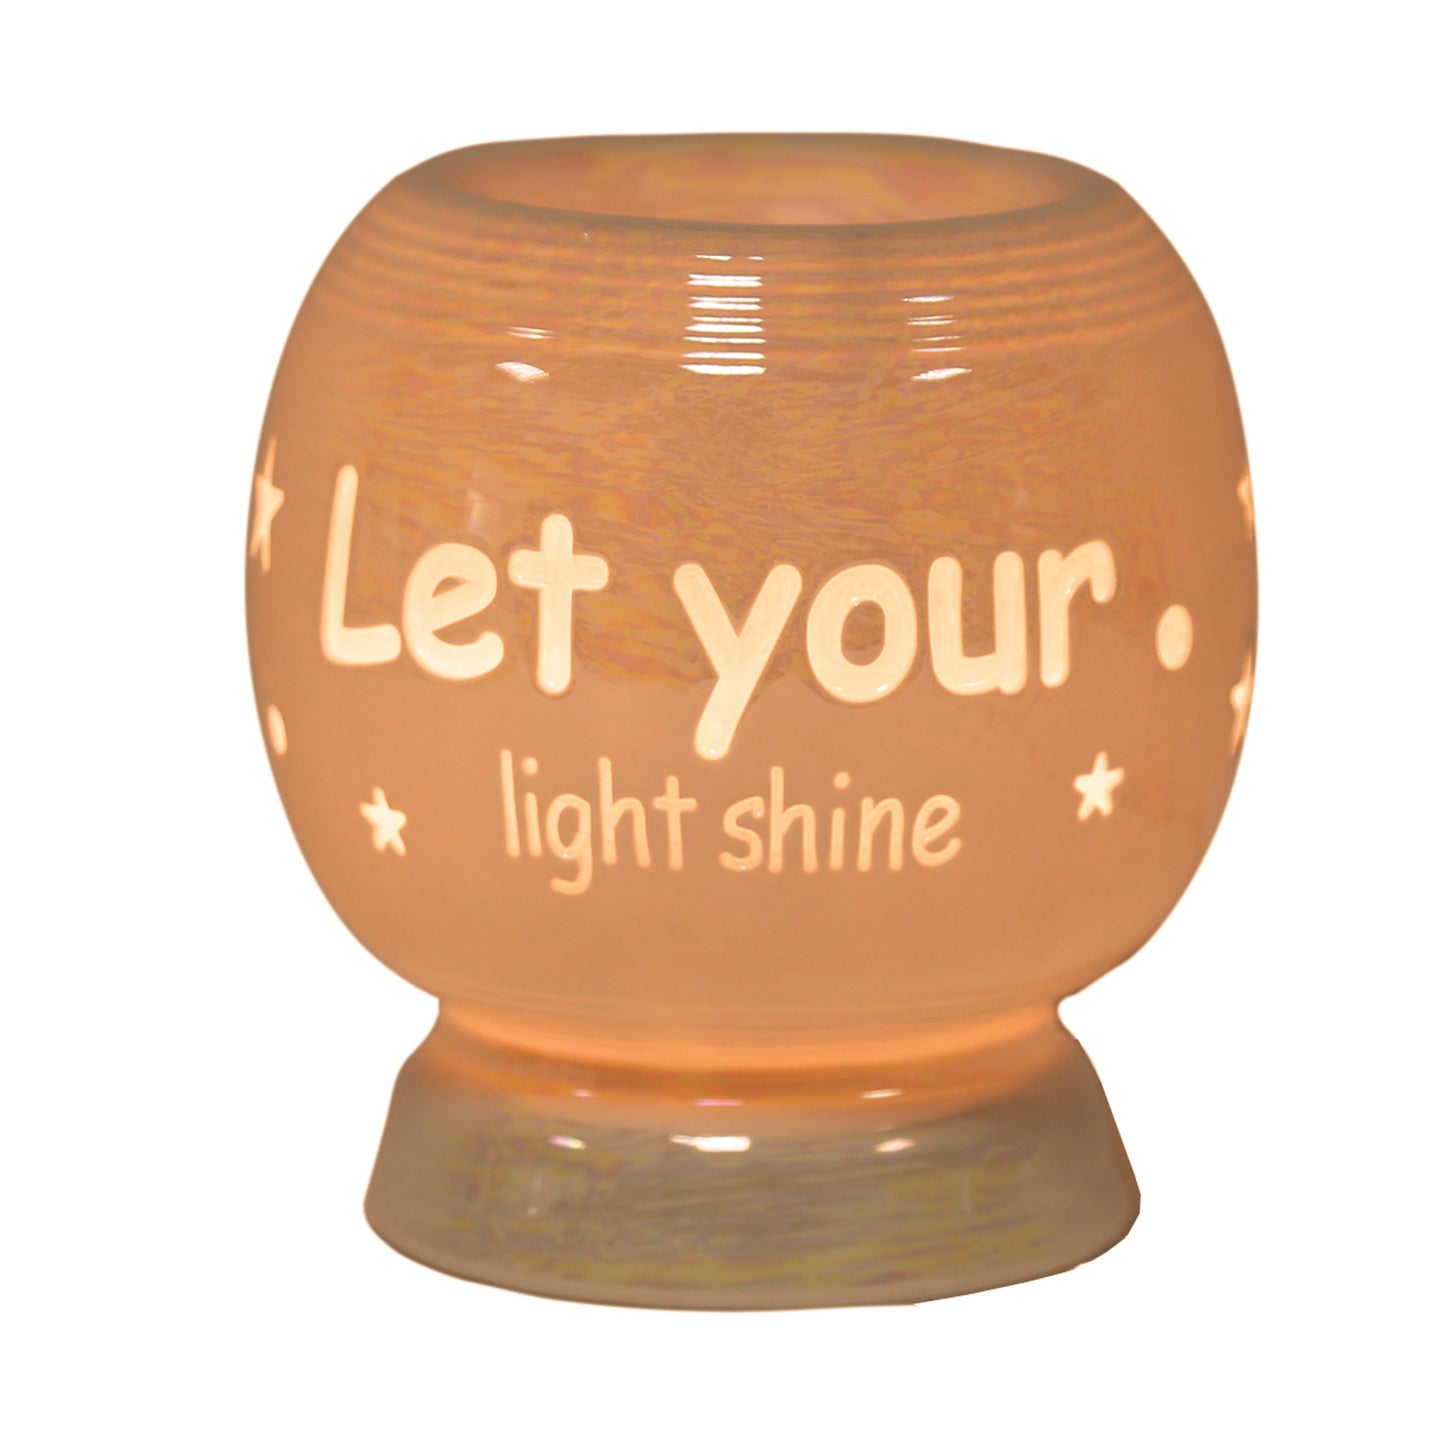 Let your Light shine